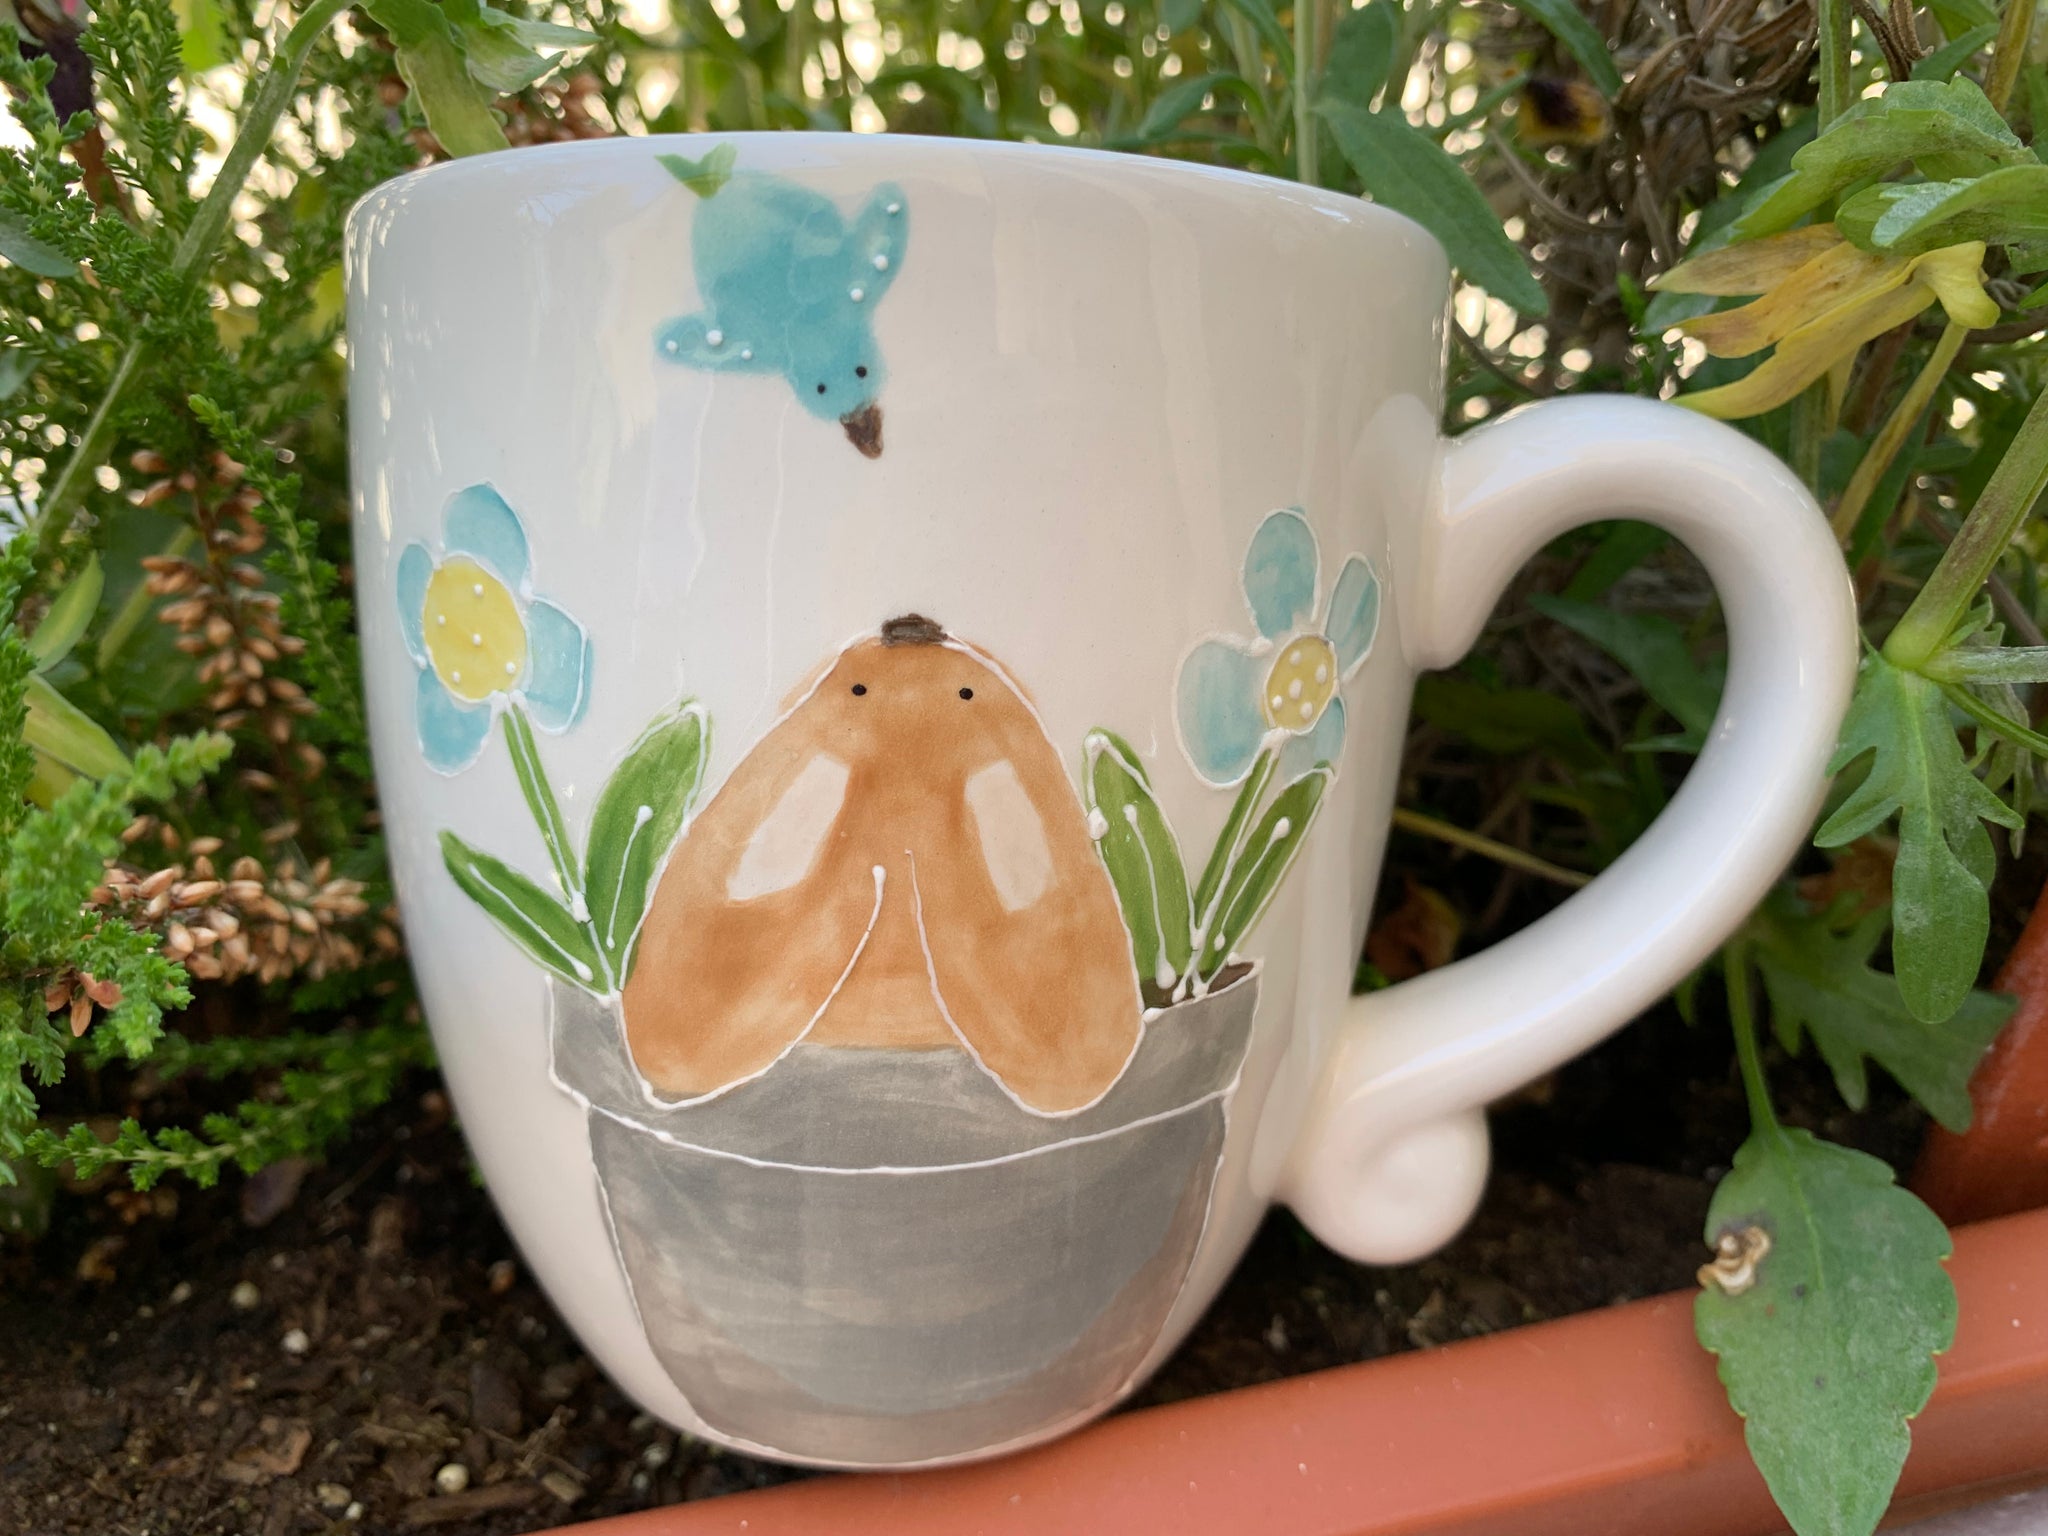 Mug “Bunny in planter” hand painted